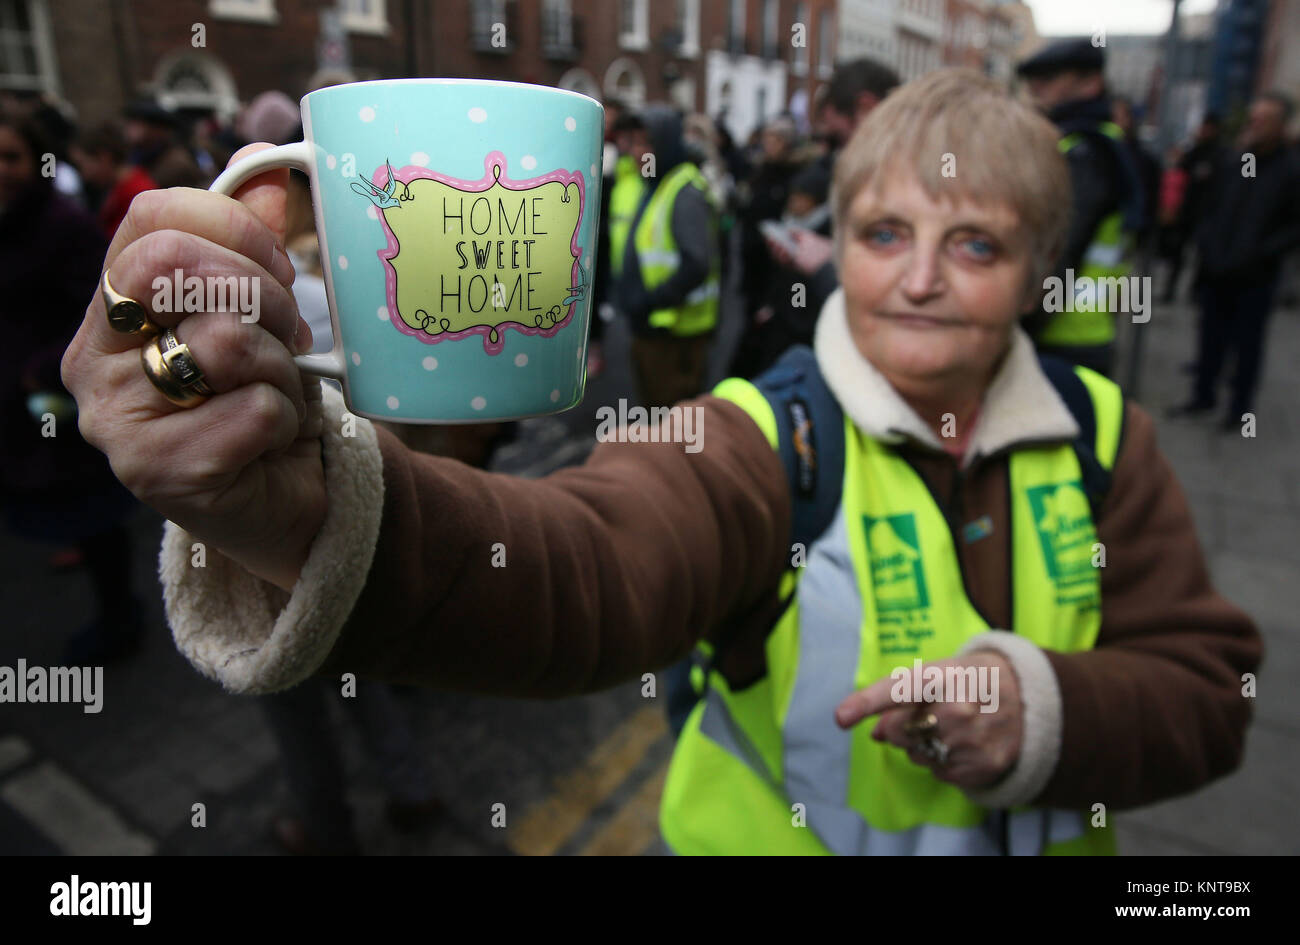 Homeless campaigner Sheila O'Byrne during a peaceful protest concert to raise awareness of homelessness in Ireland outside Leinster House, Dublin. Stock Photo